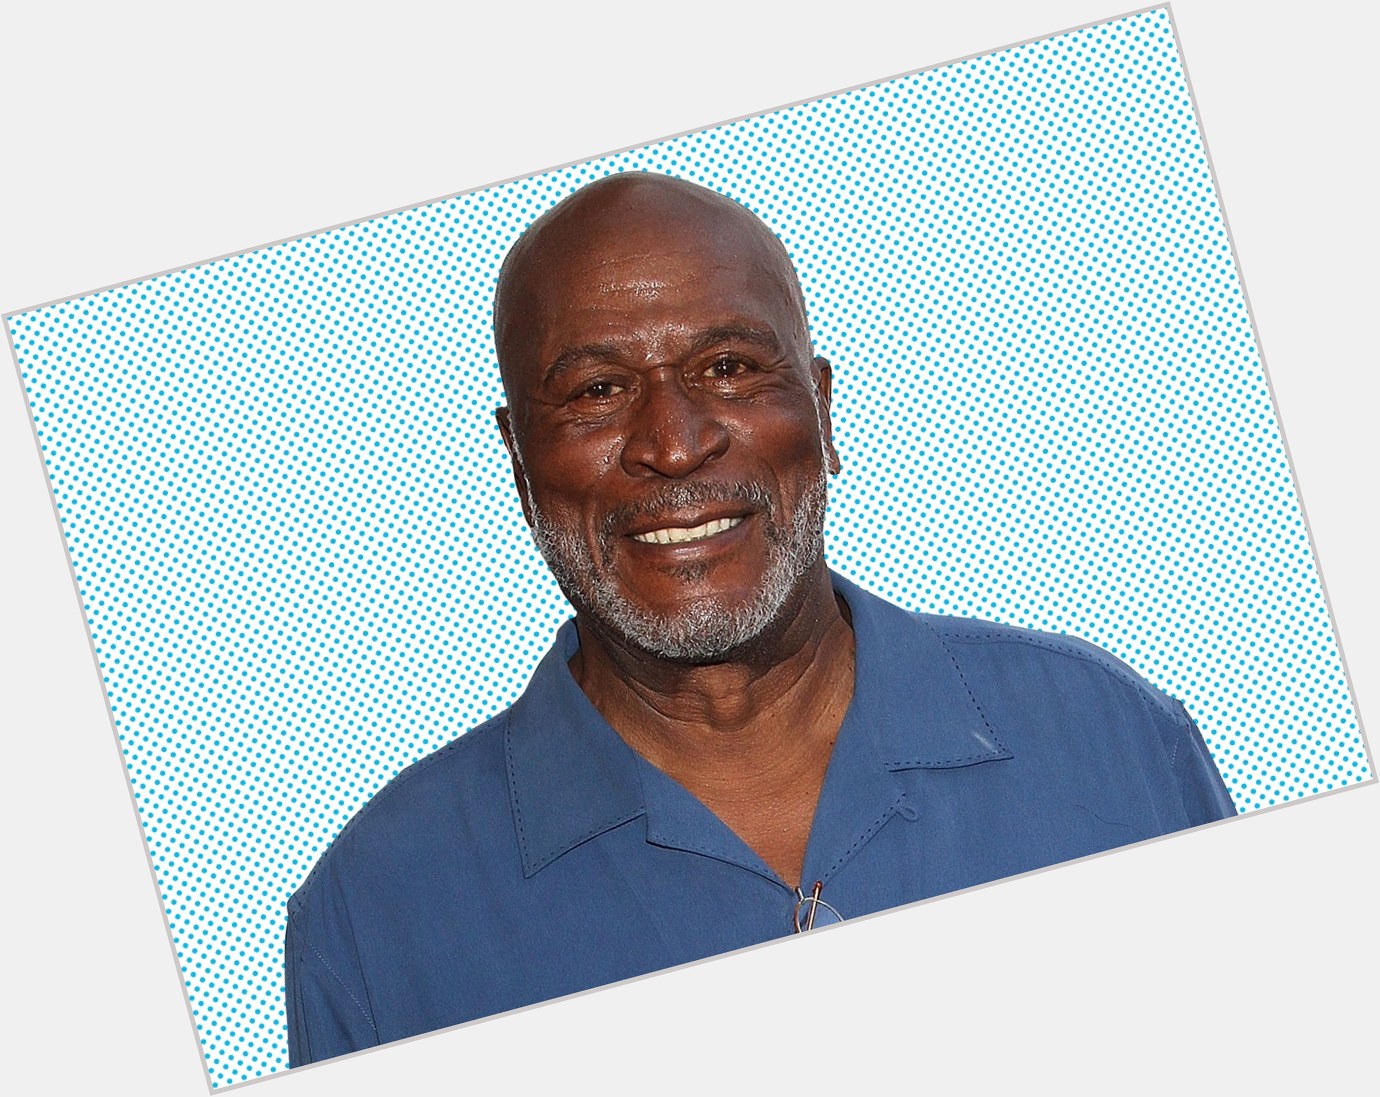 Happy big 80th birthday to John Amos!! What comes to mind when you think of John? 